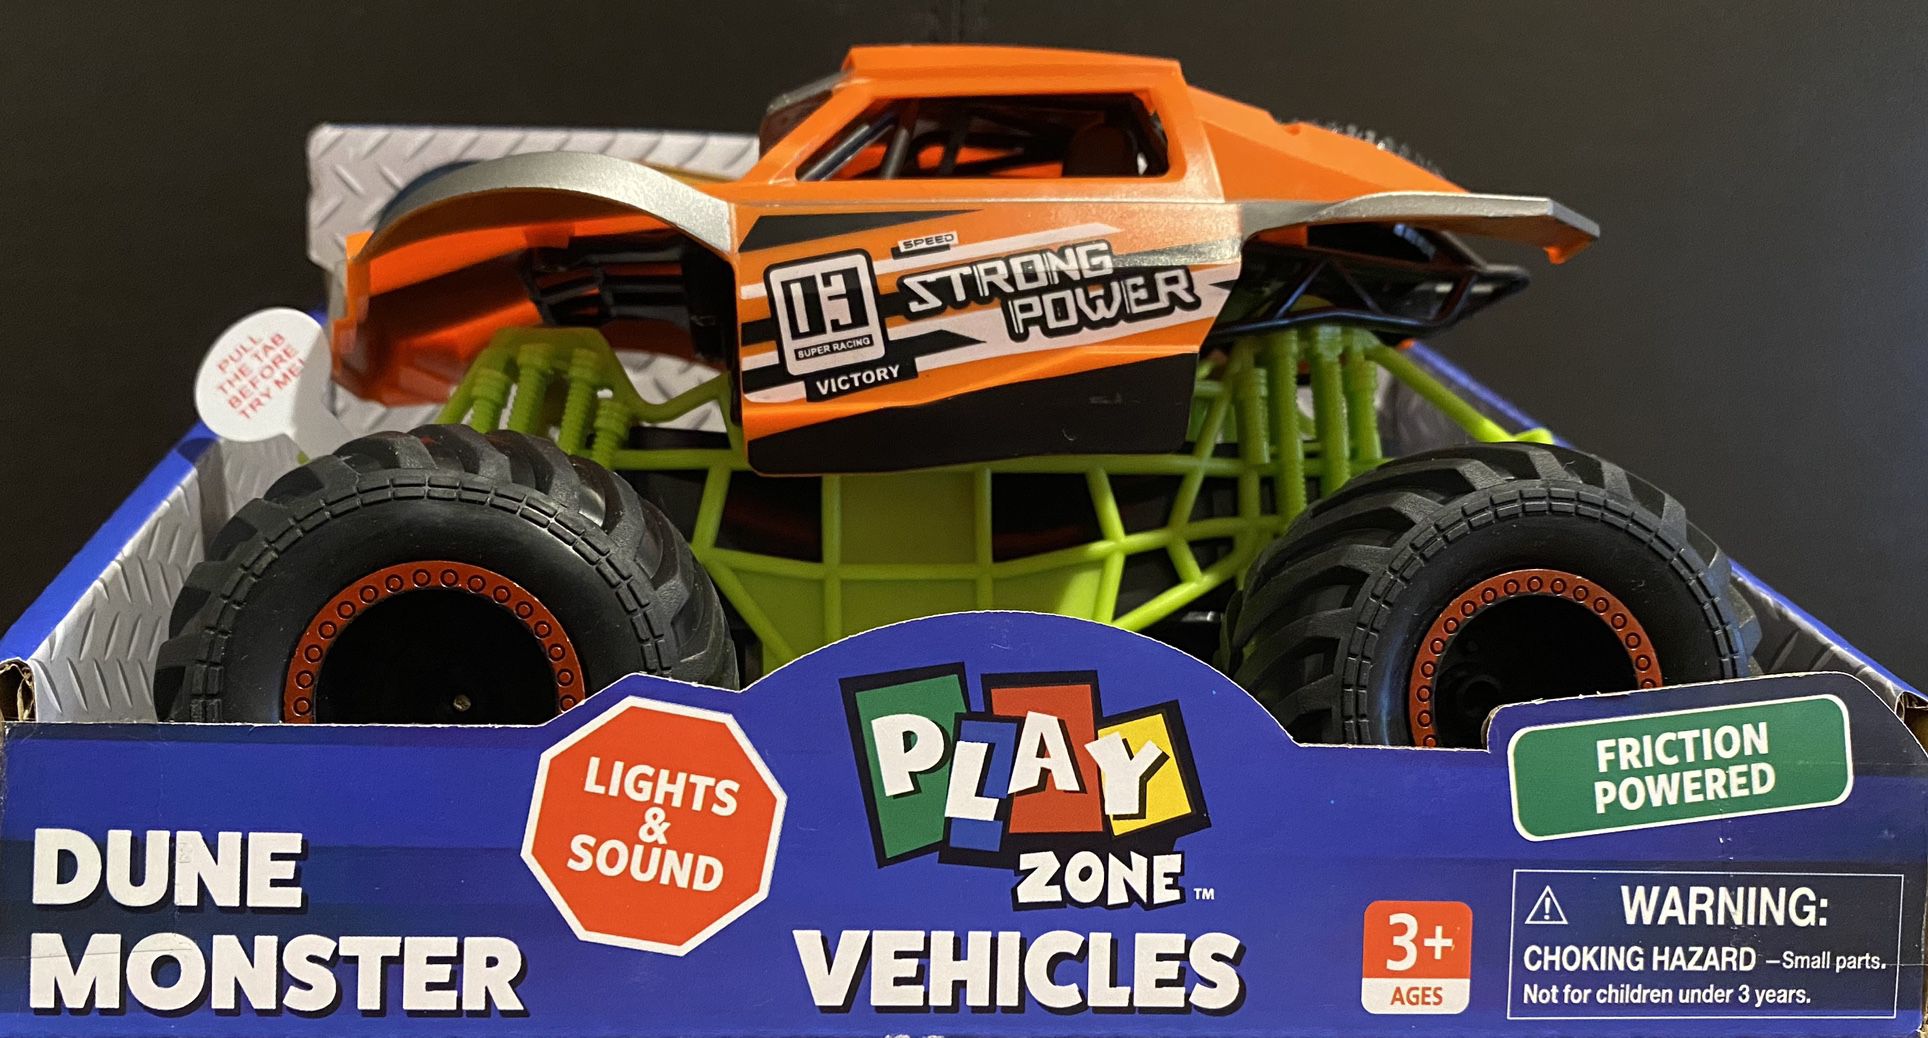 Dune Monster, lights and sound, Play Zone Vehicles